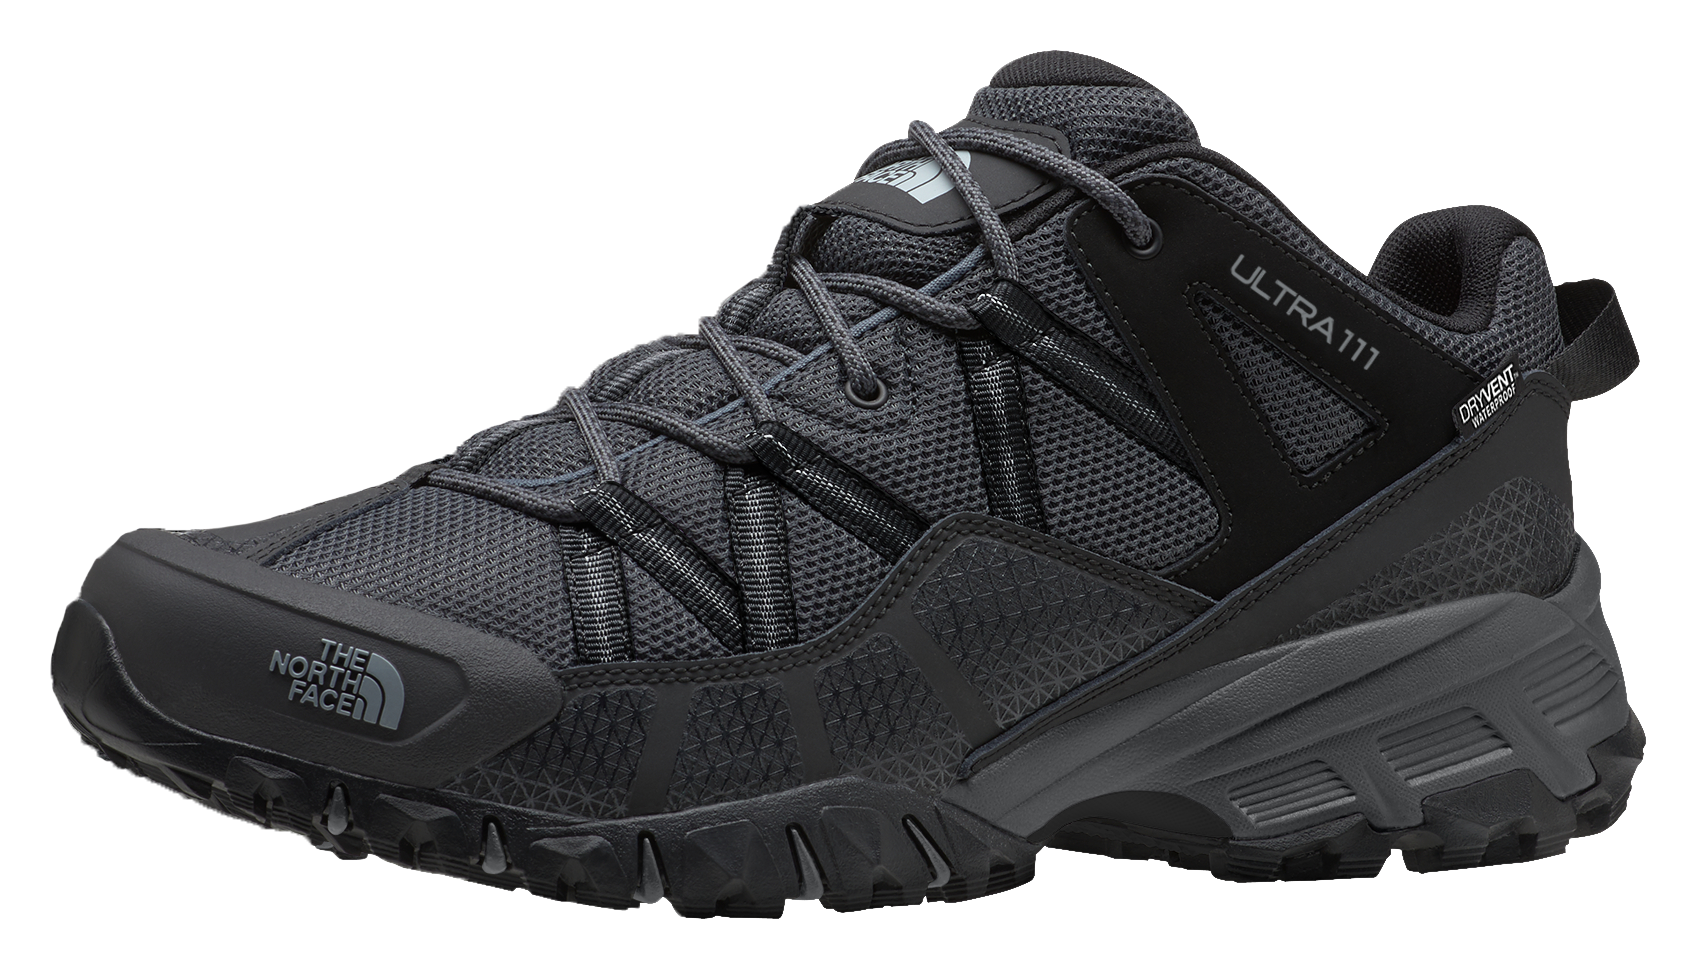 The North Face Ultra 111 Waterproof Hiking Shoes for Men - TNF Black/Dark Shadow Grey - 11M